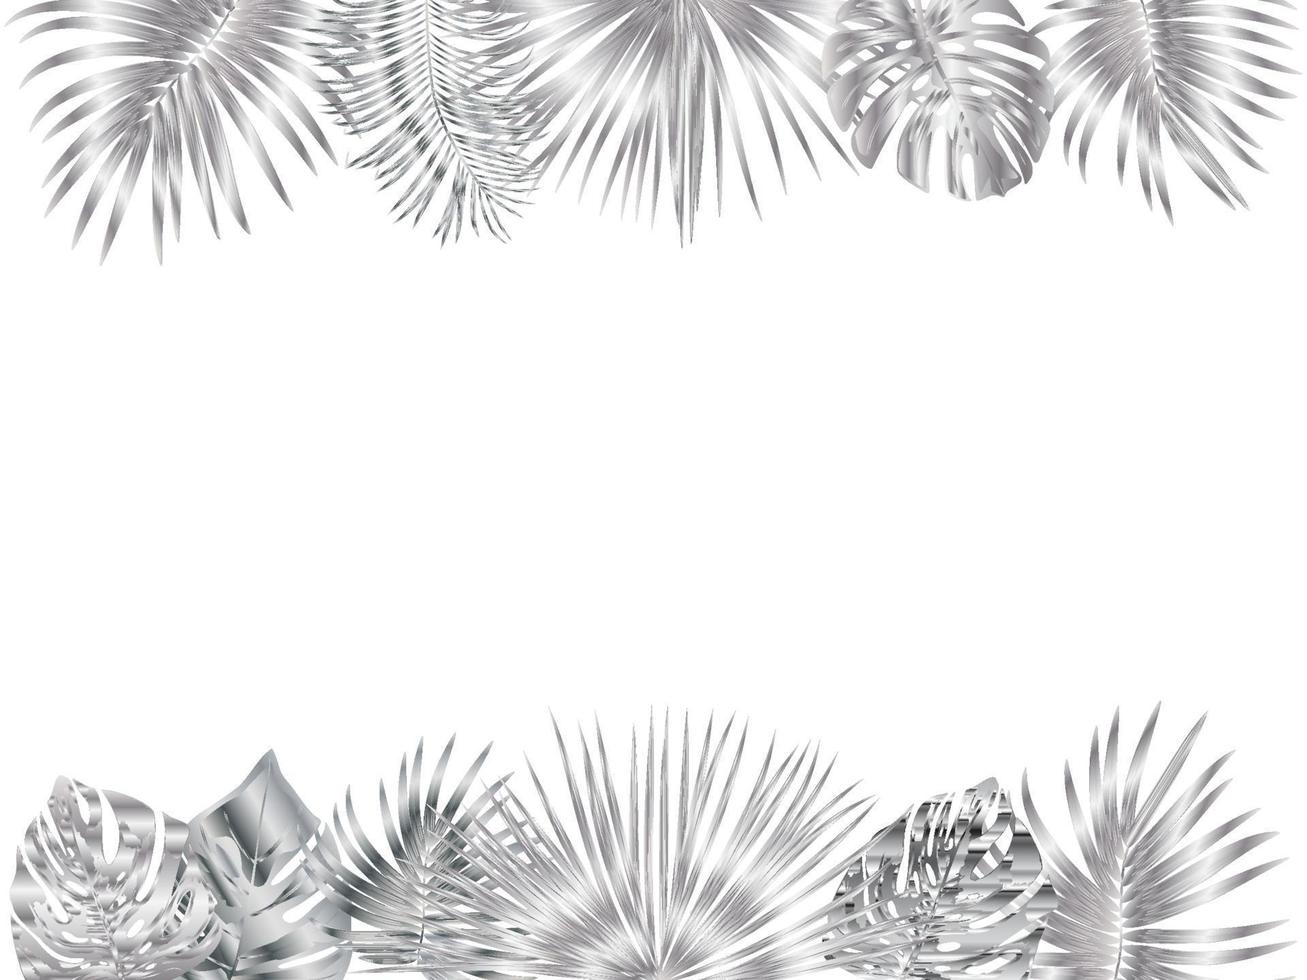 Vector tropical jungle frame with silver palm trees and leaves on white background